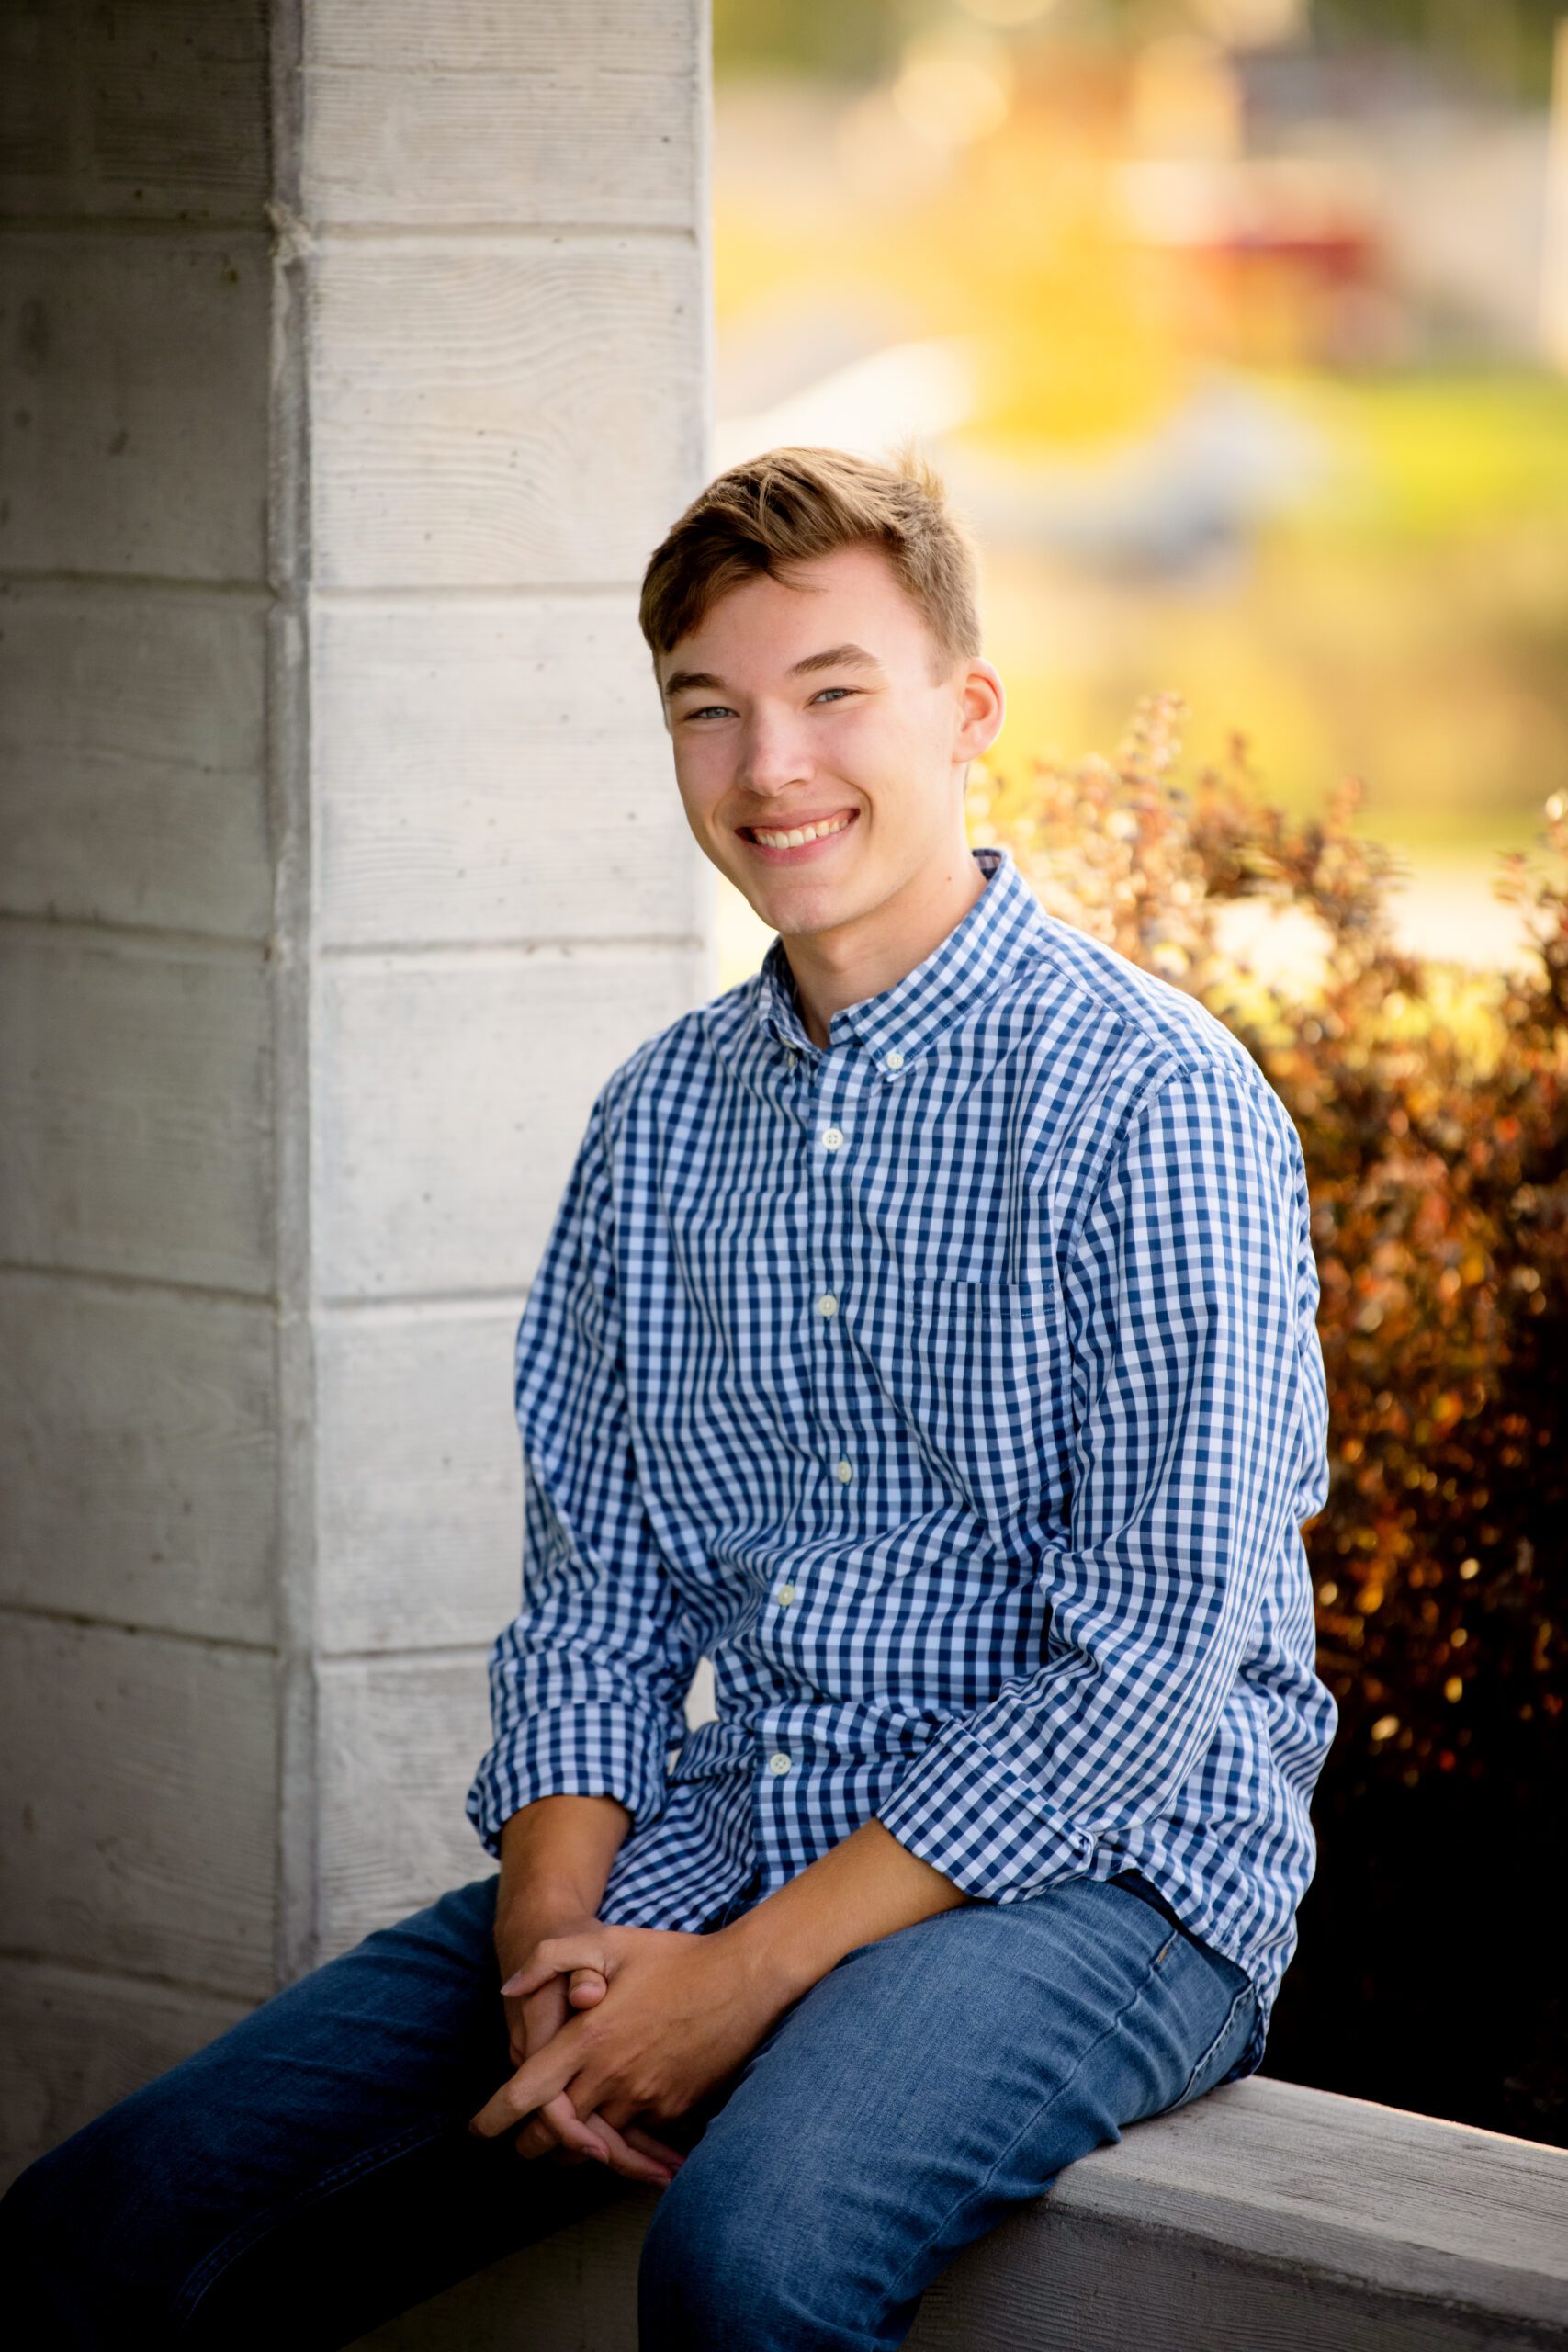 senior pictures. greendale senior boy sitting on concrete wall with blue and white checked shirt on smiling at the camera
